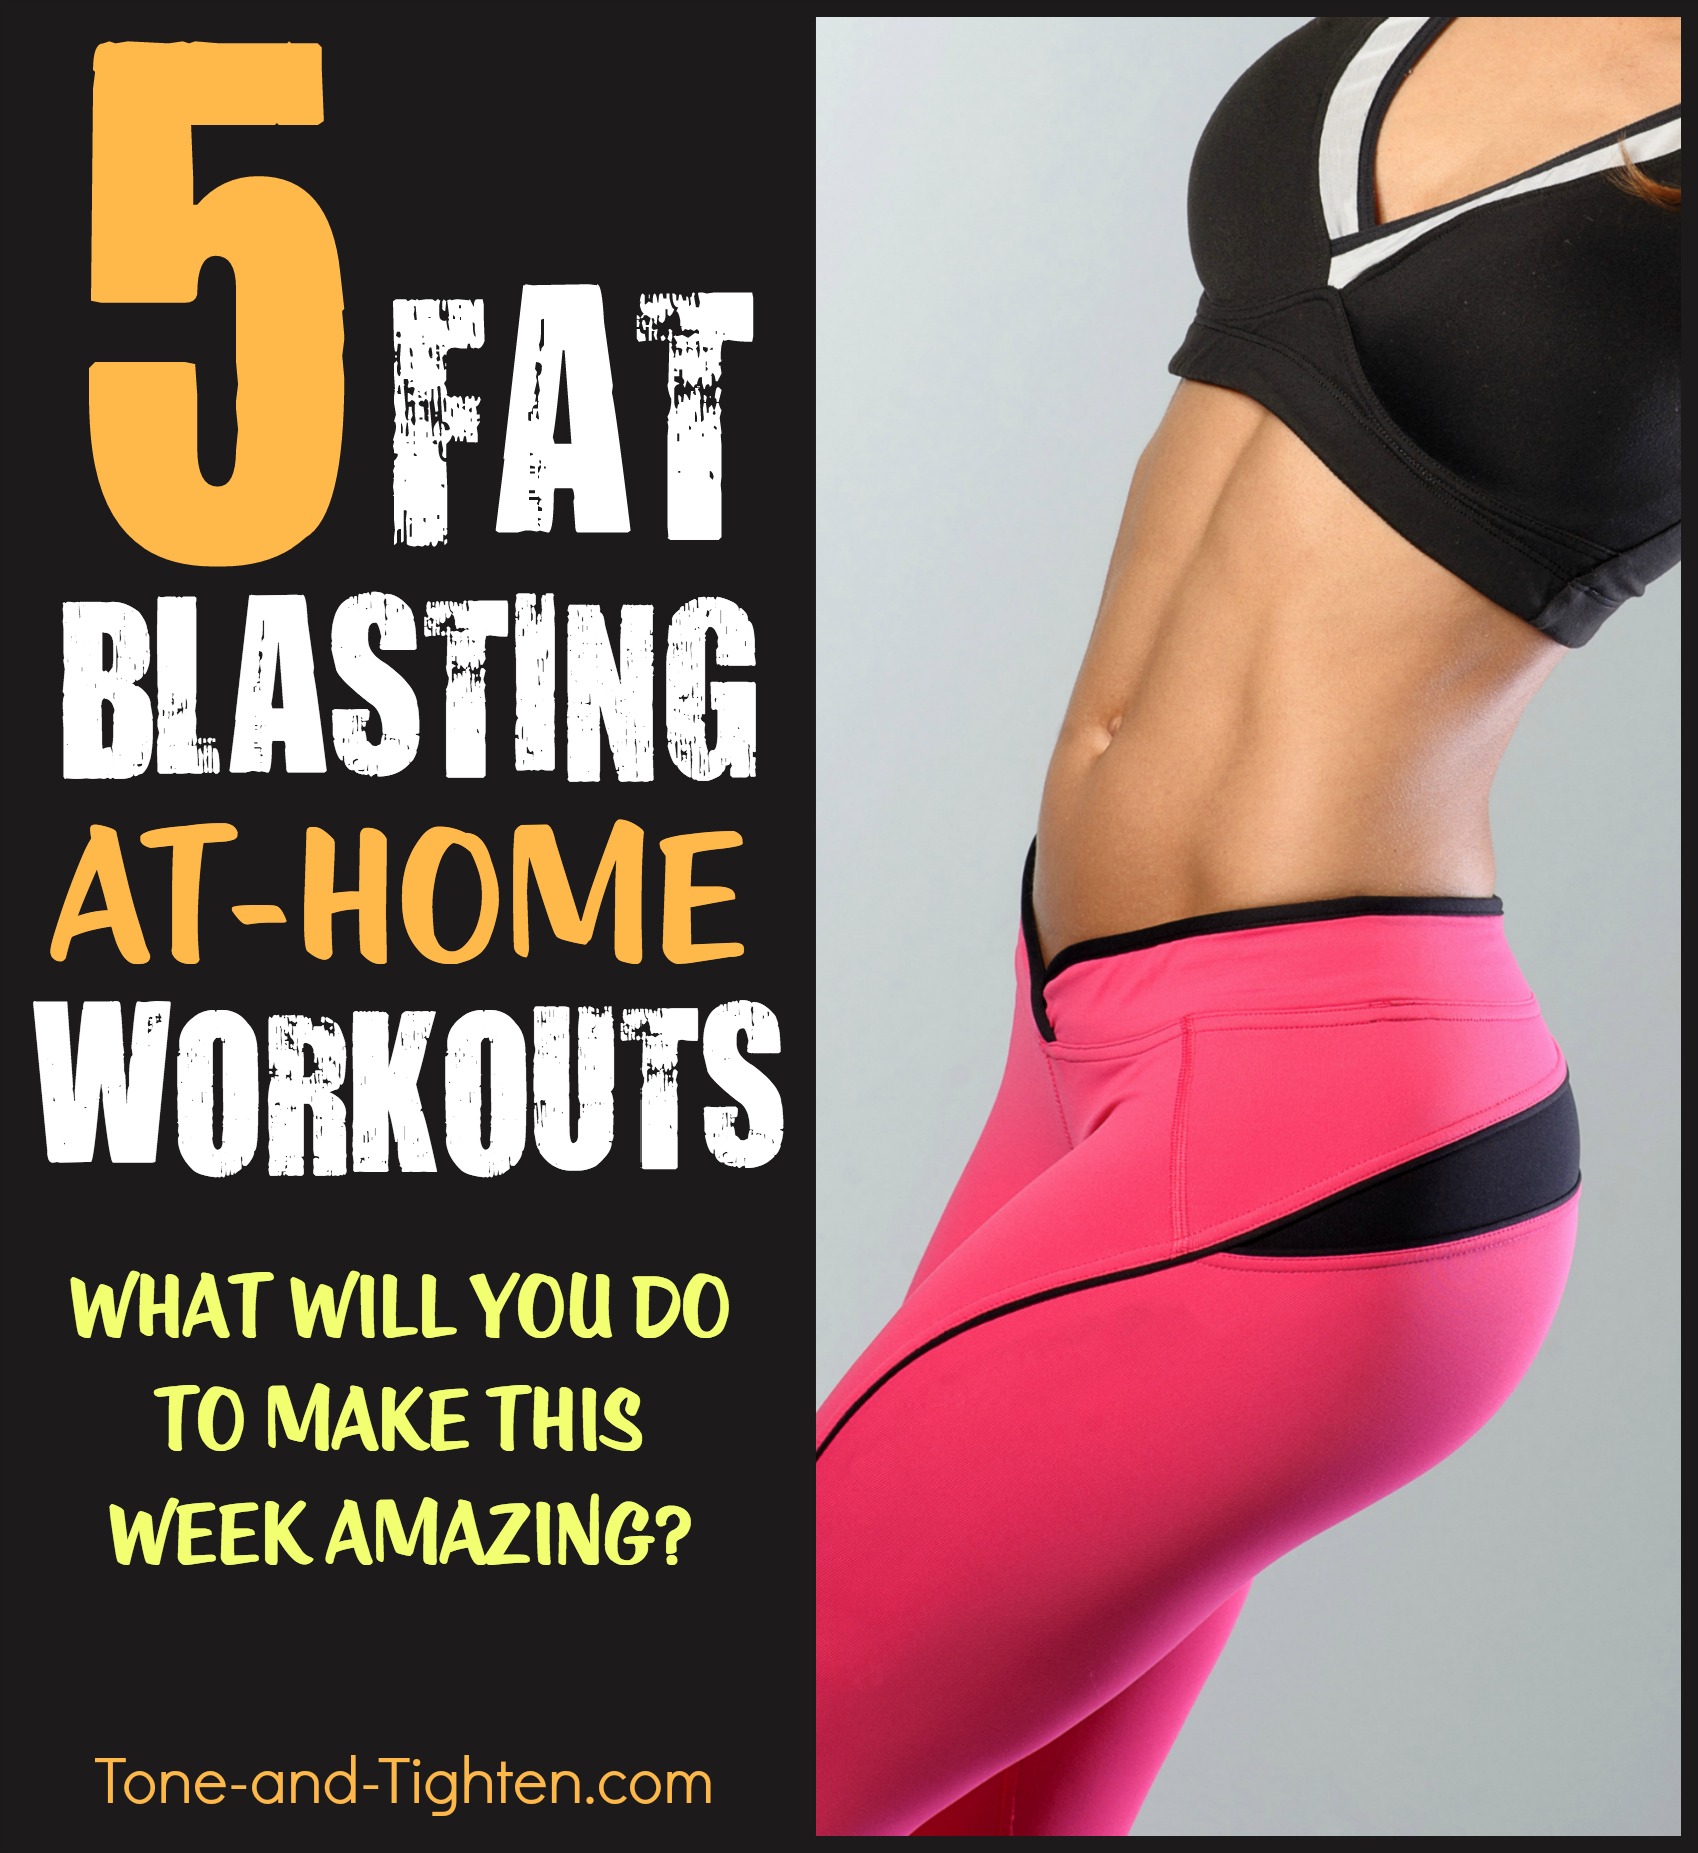 5 Fat Blasting Workouts When You Need Them The Most!